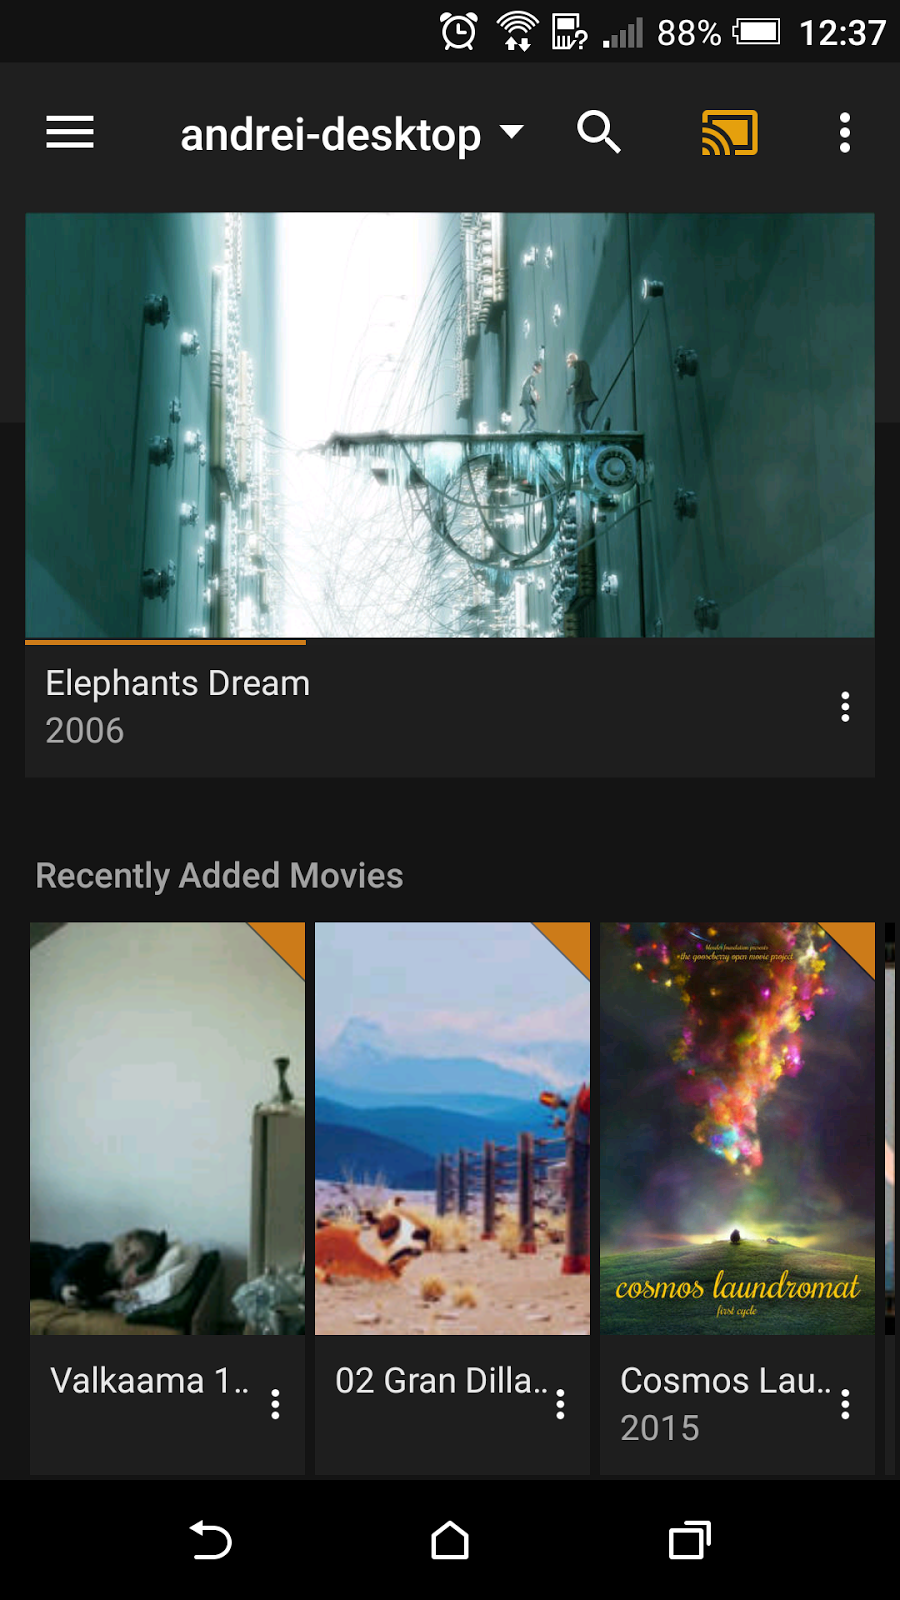 How To Use Plex To Cast Local Videos To Chromecast (From Your Desktop w/ Optional Mobile App) ~ Web Upd8: Ubuntu / blog